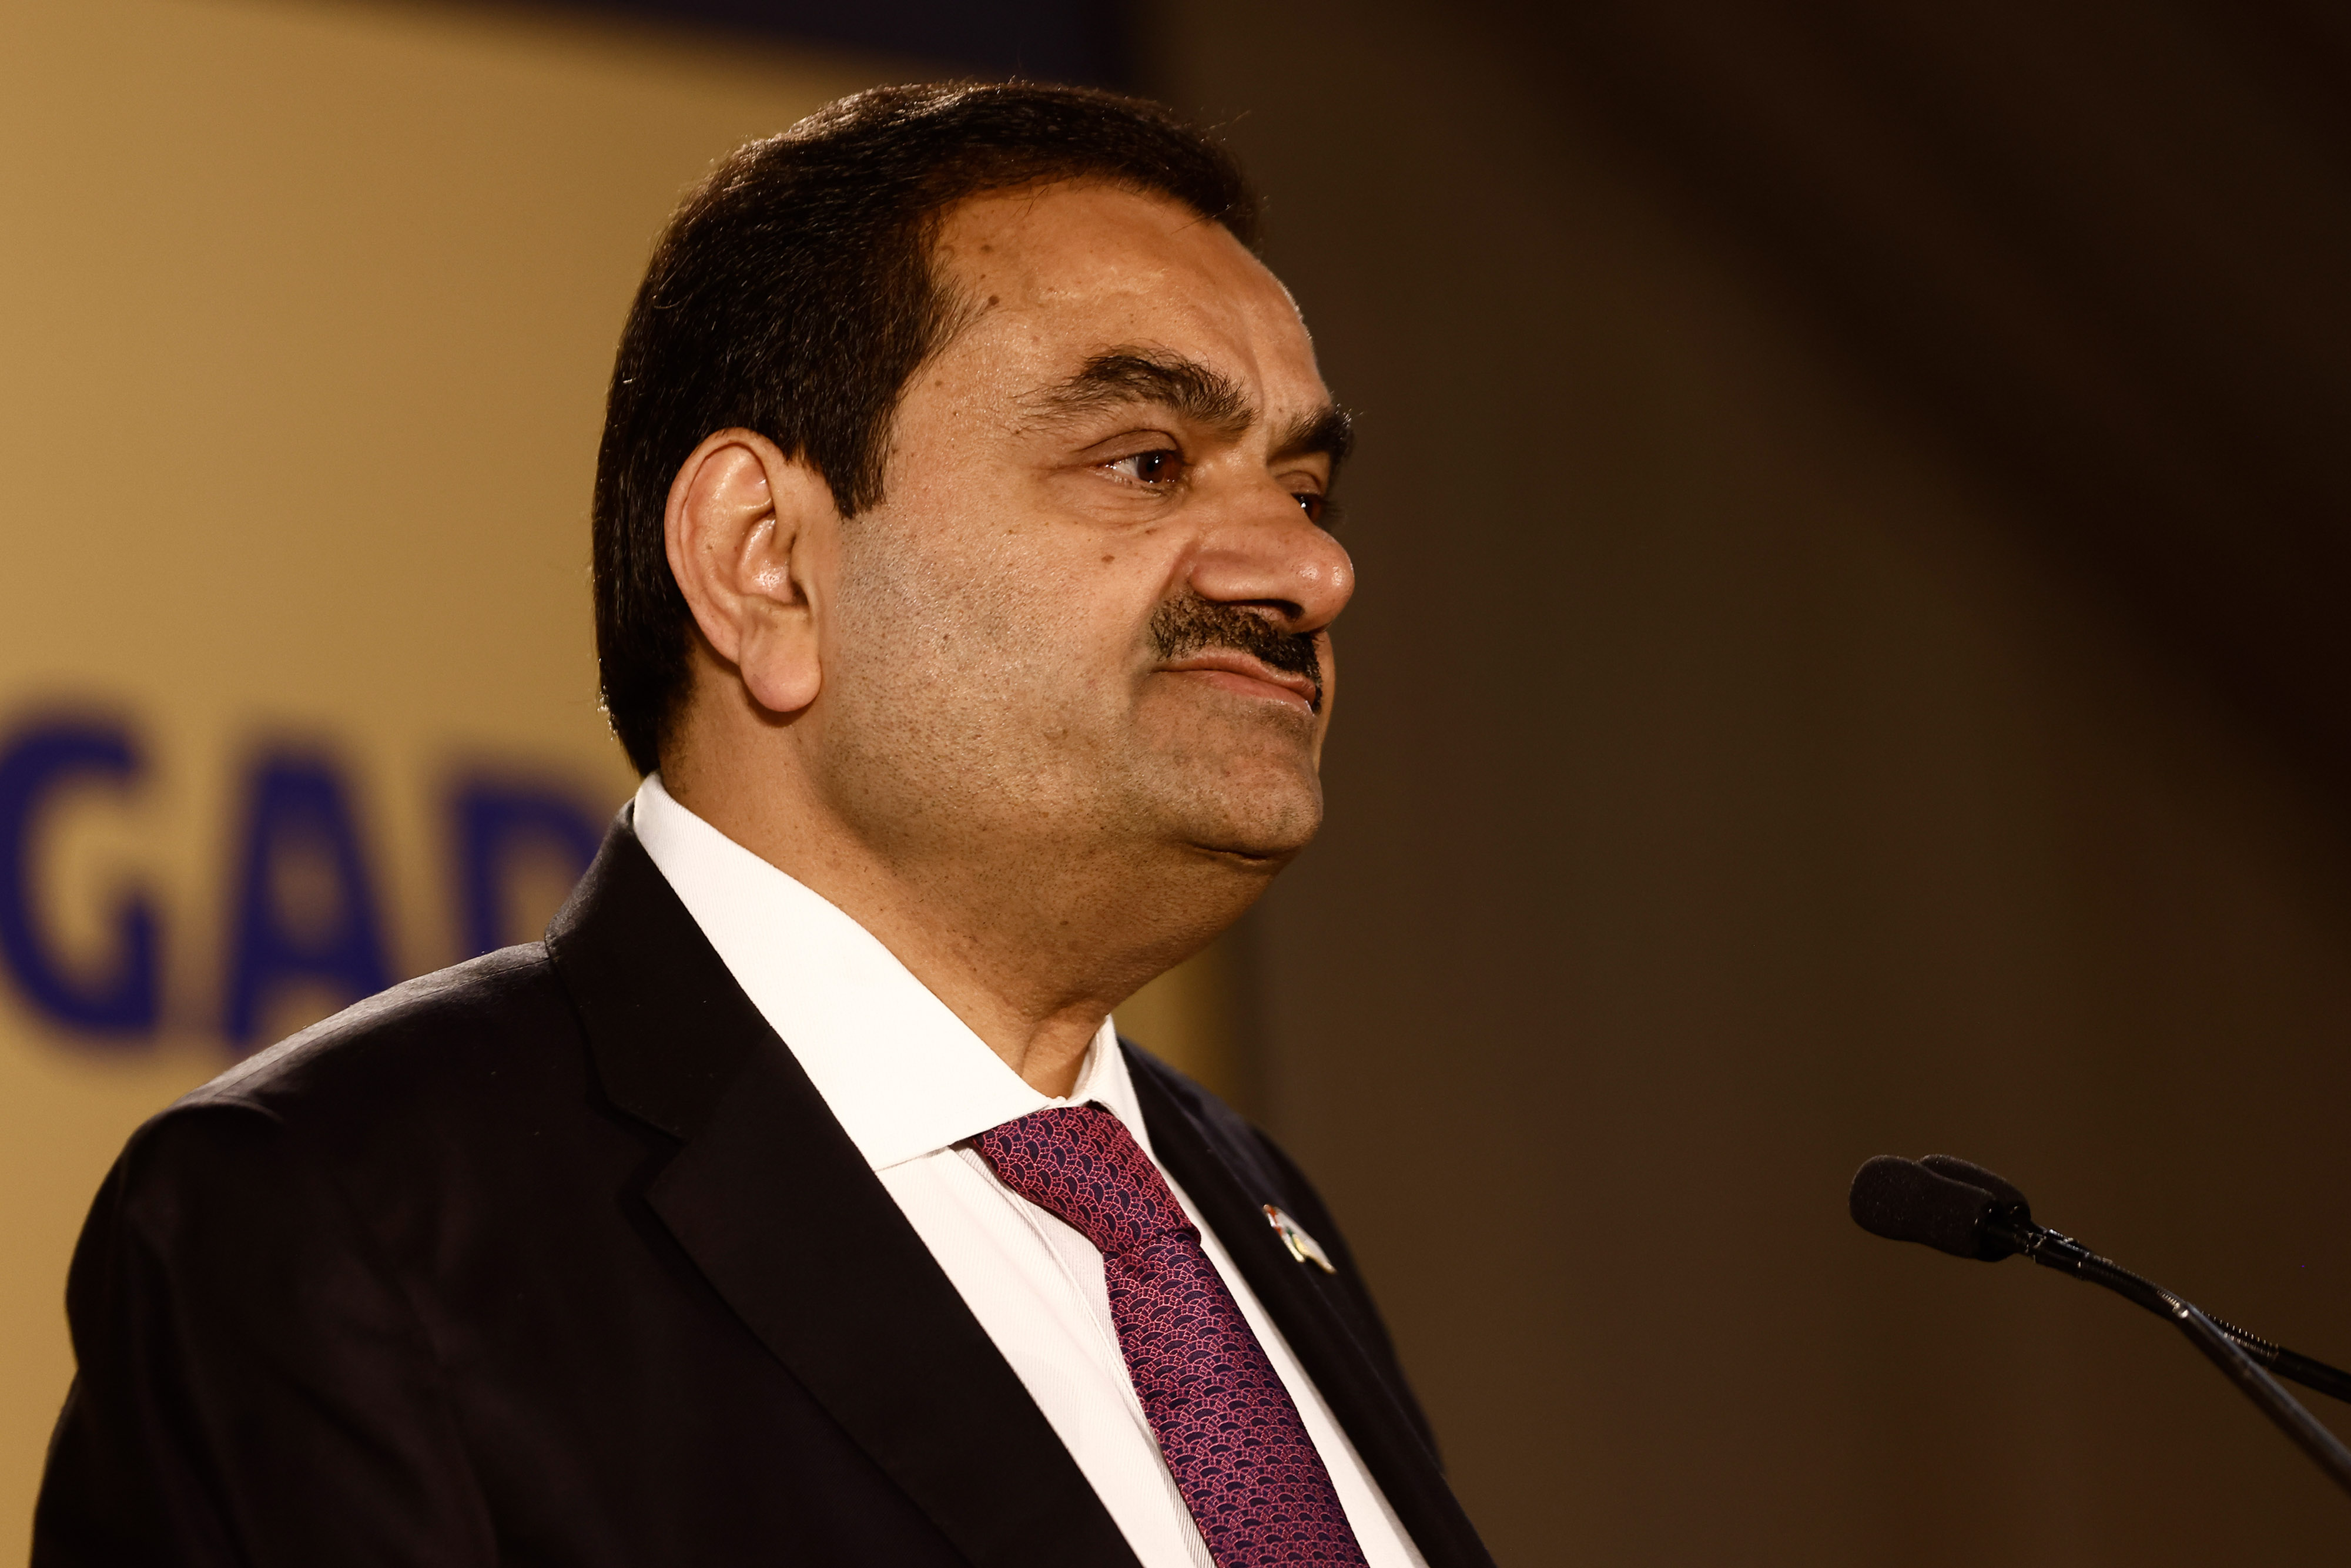 Adani Utility Shows Funding Urgency to Power India as Group Recovers From  Rout - Bloomberg